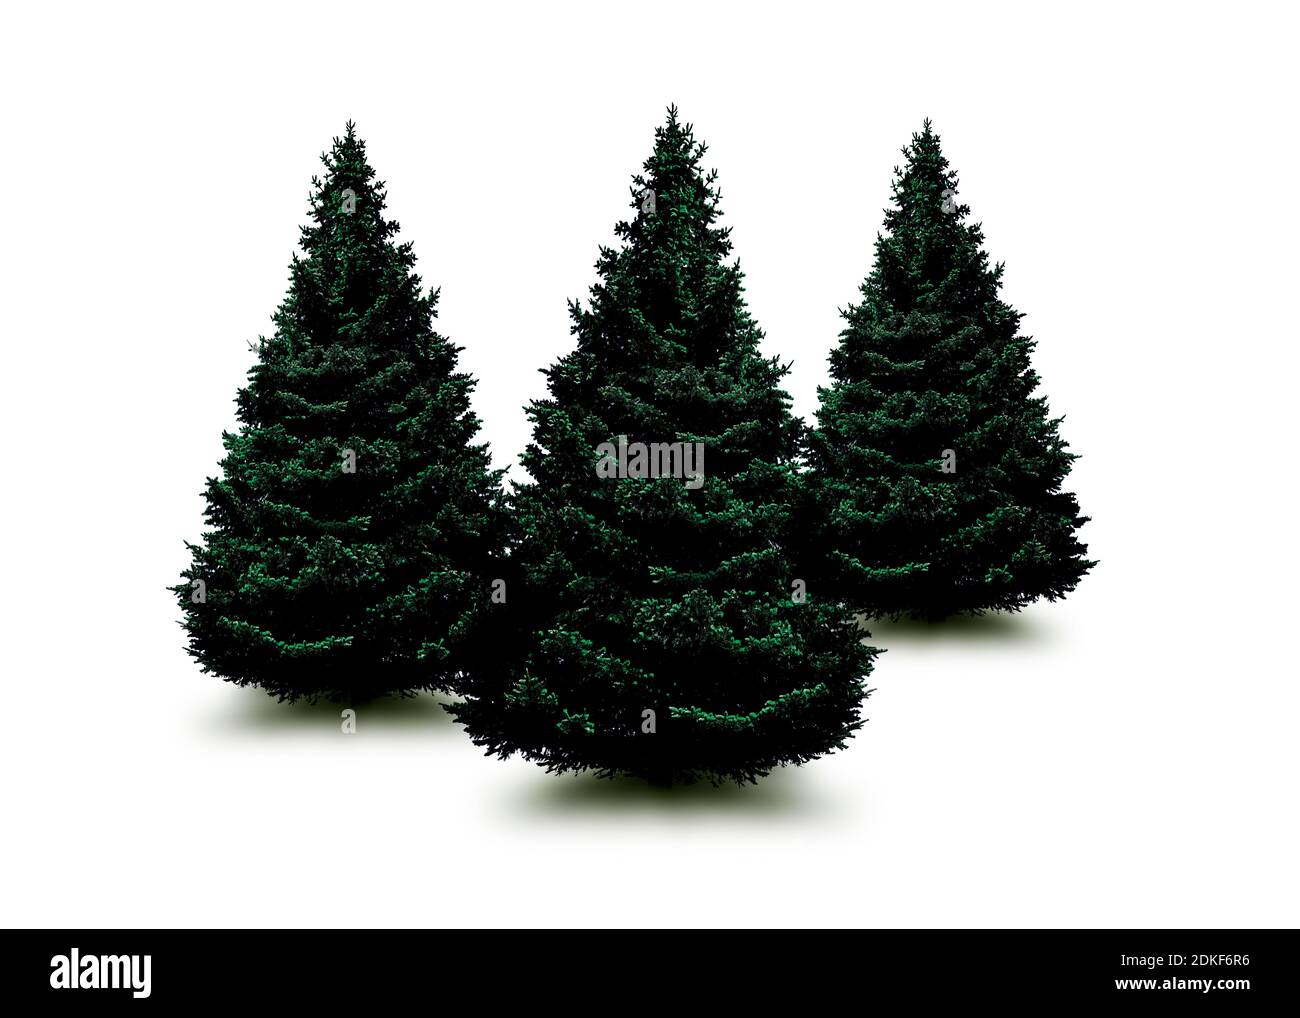 Three unadorned fir trees against a white background Stock Photo